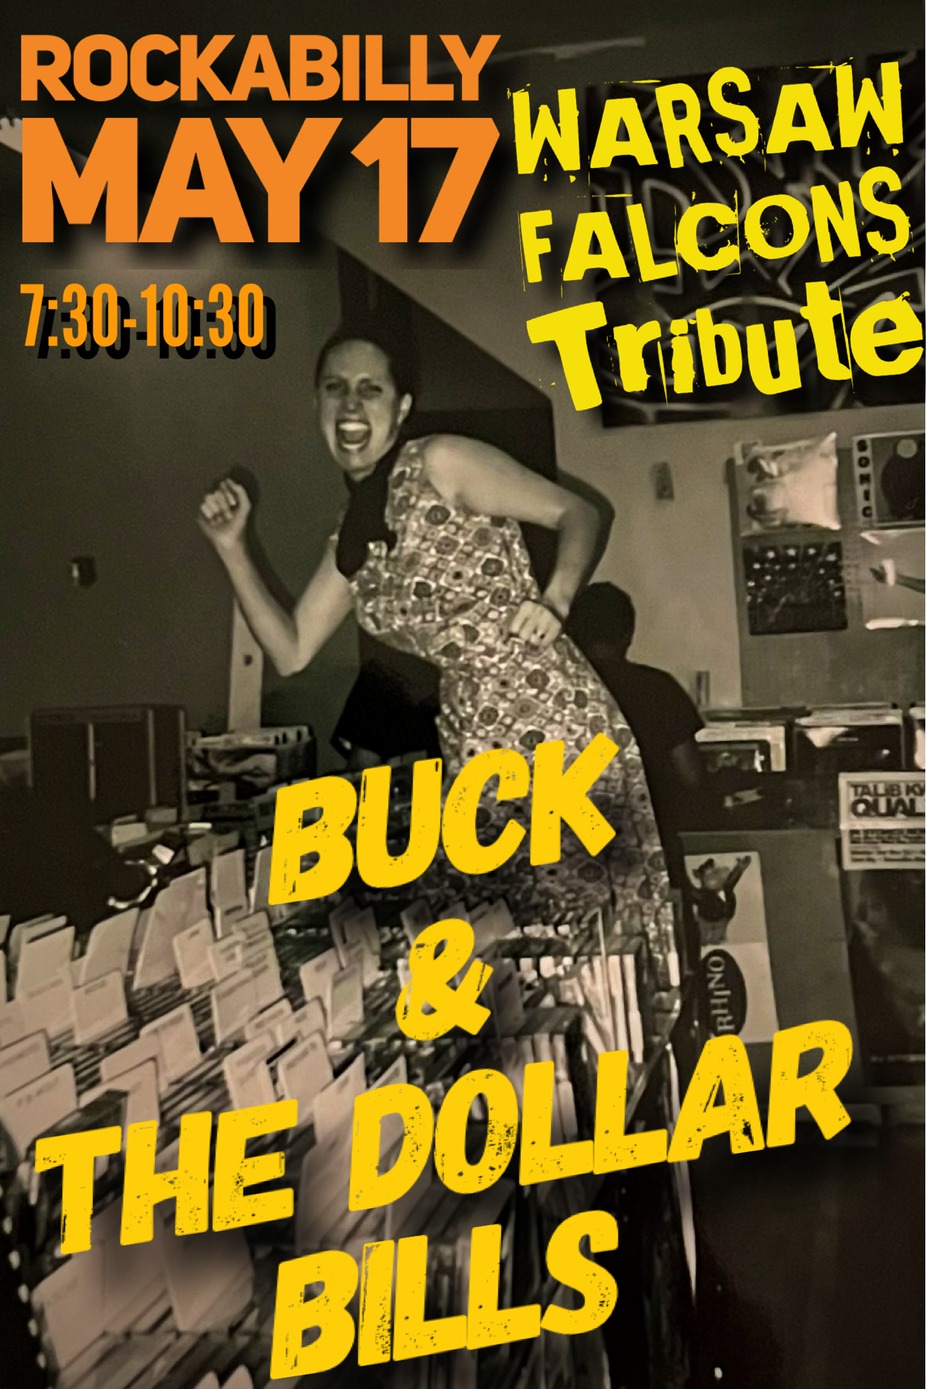 LIVE MUSIC by Buck & the Dollar Bills event photo